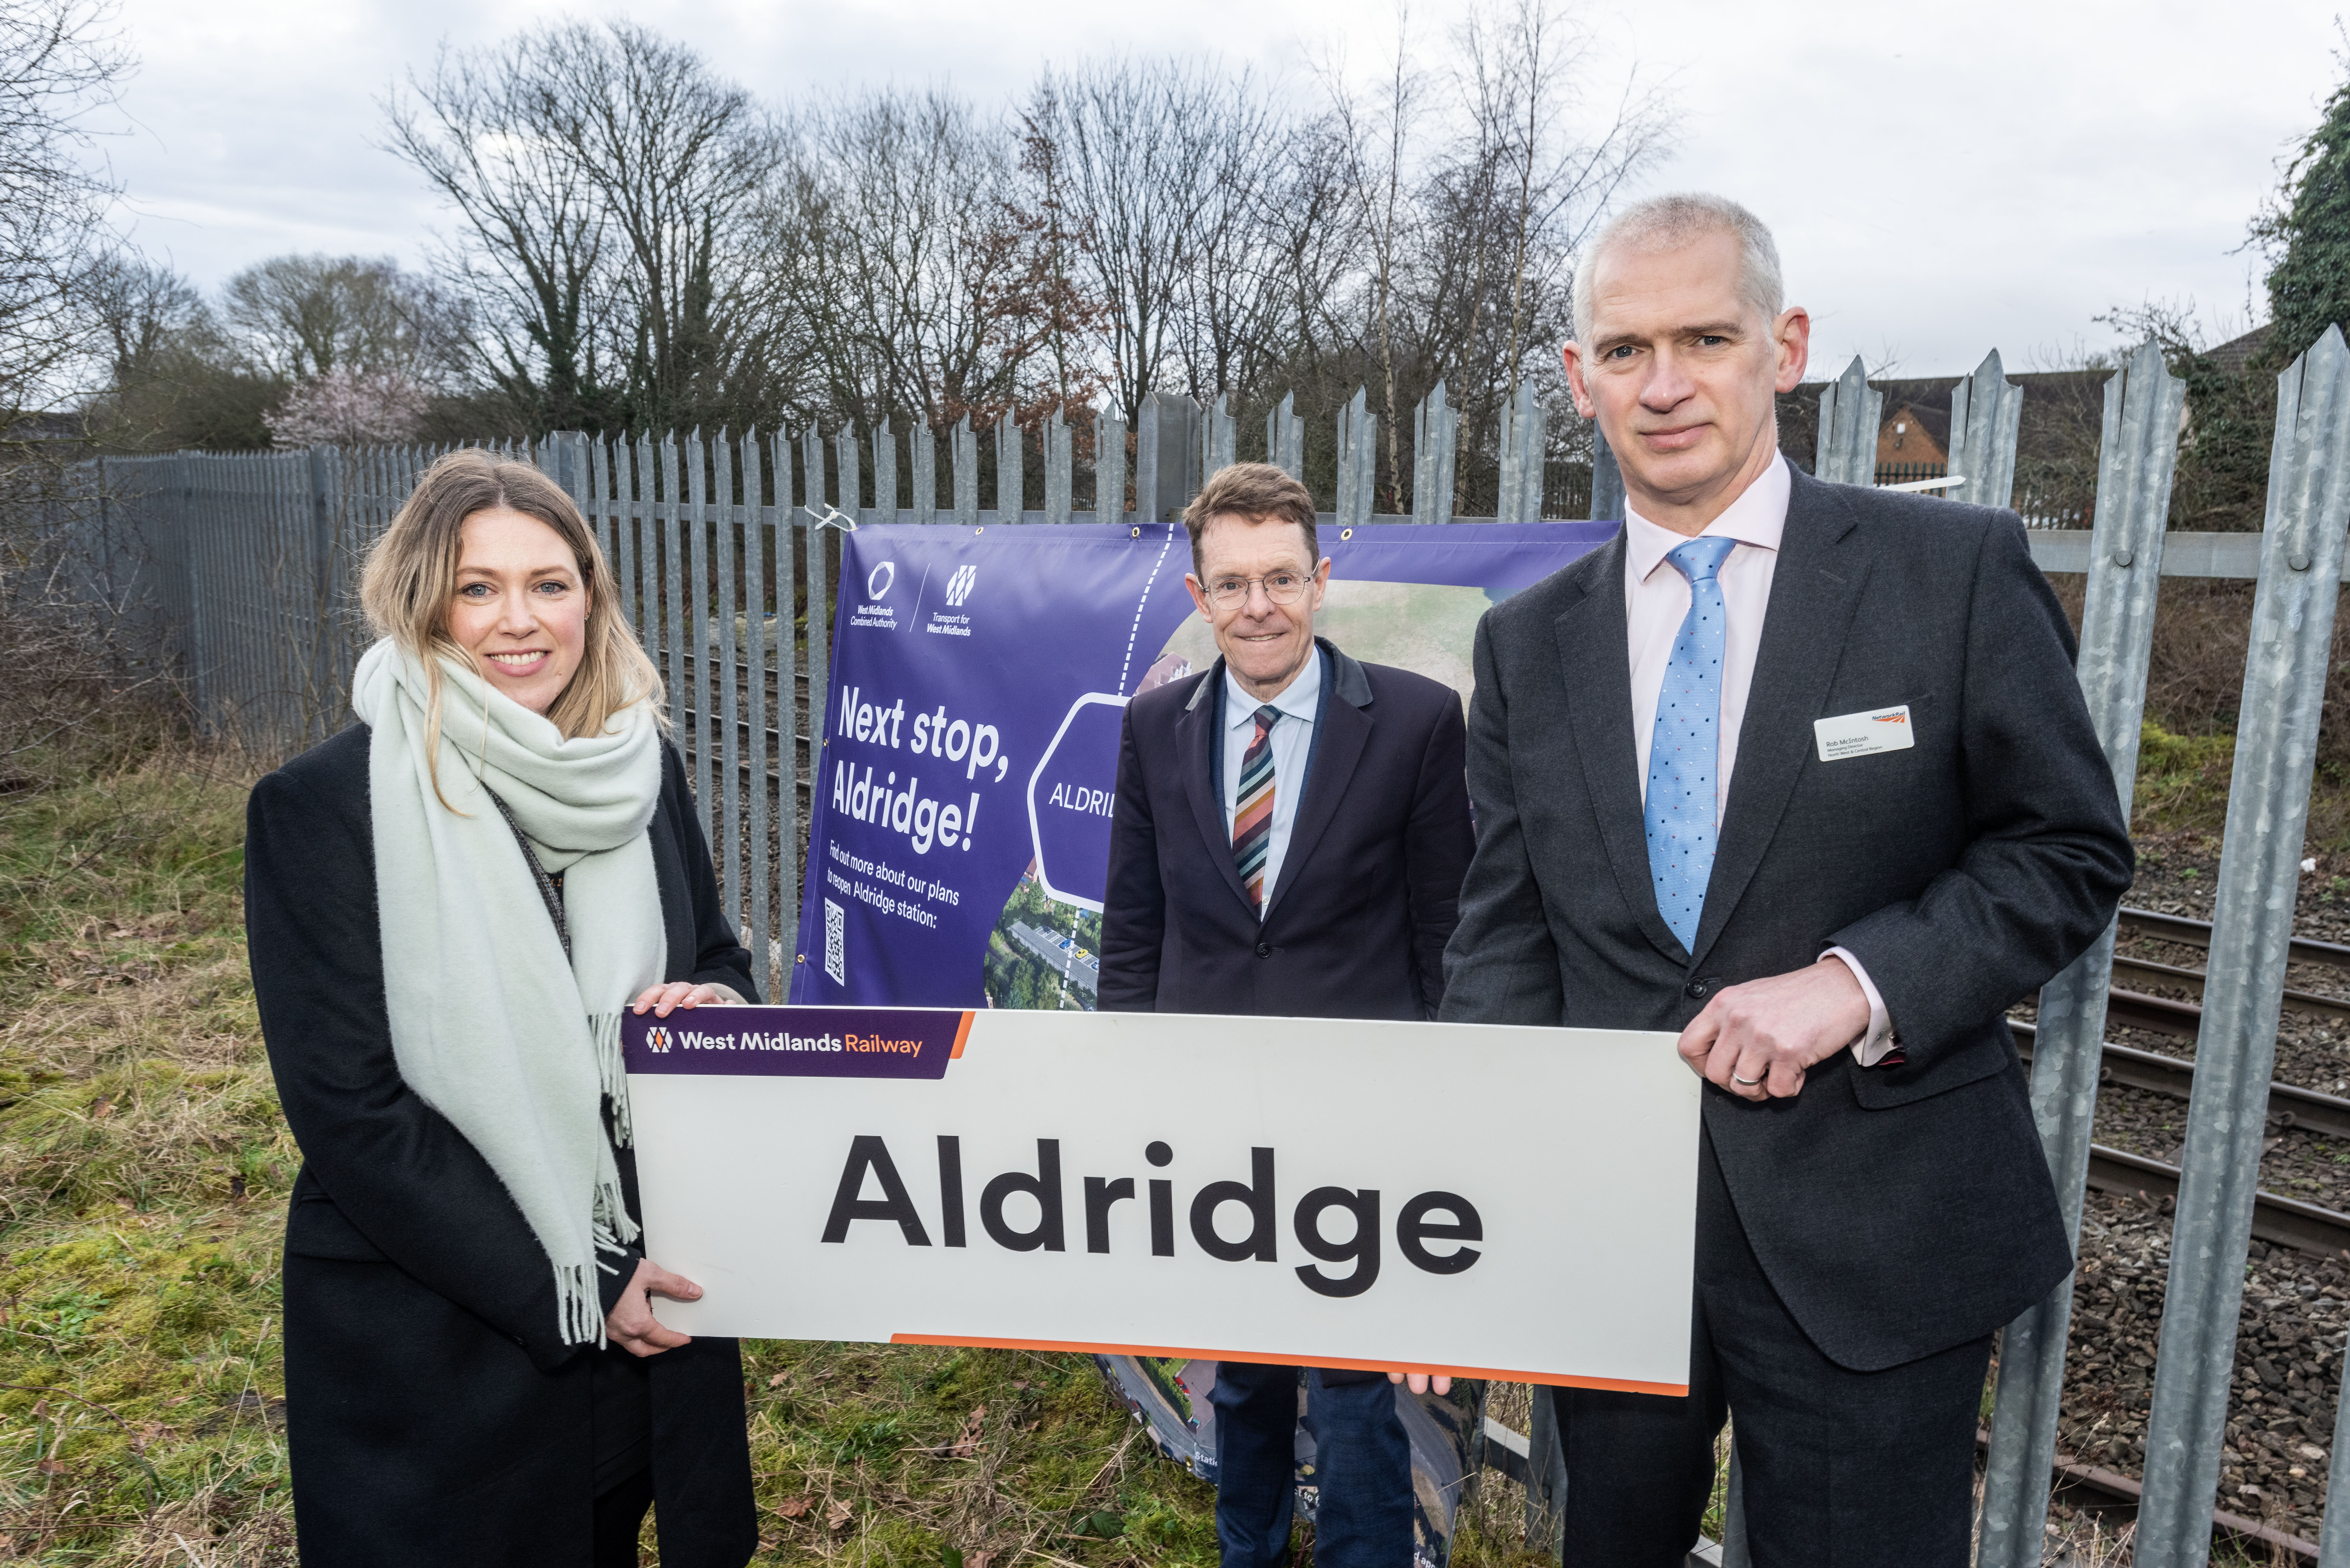 Kate Trevorrow, TfWM rail delivery director, Andy Street Mayor of the West Midlands and Rob McIntosh, managing director for Network Rail's North West and Central Region at the station site